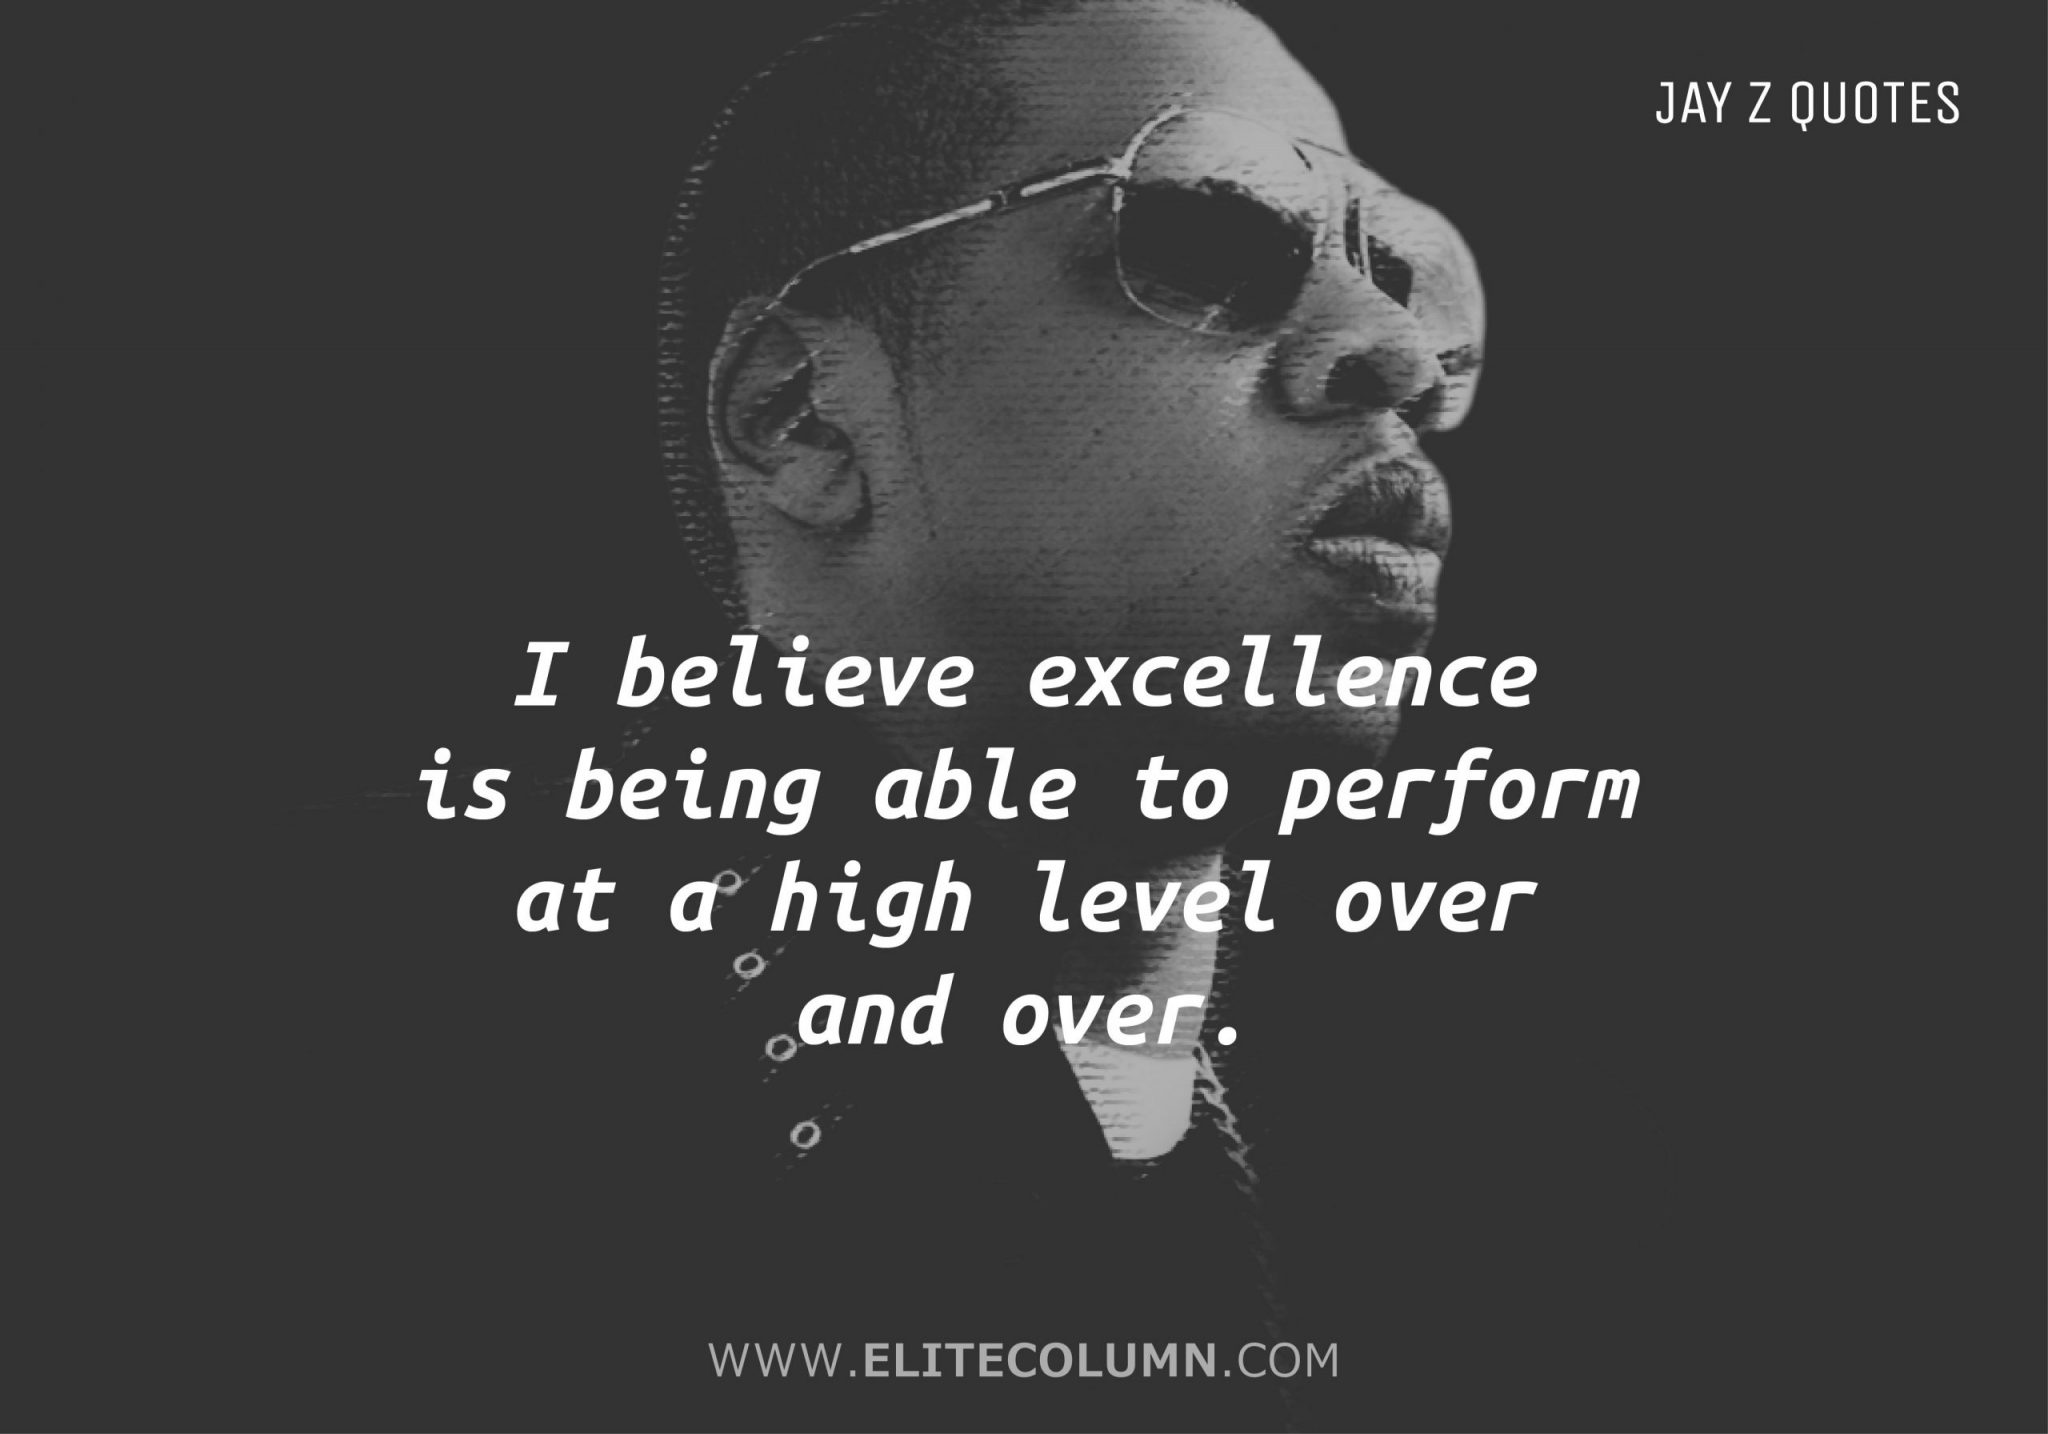 jay z on to the next one quote